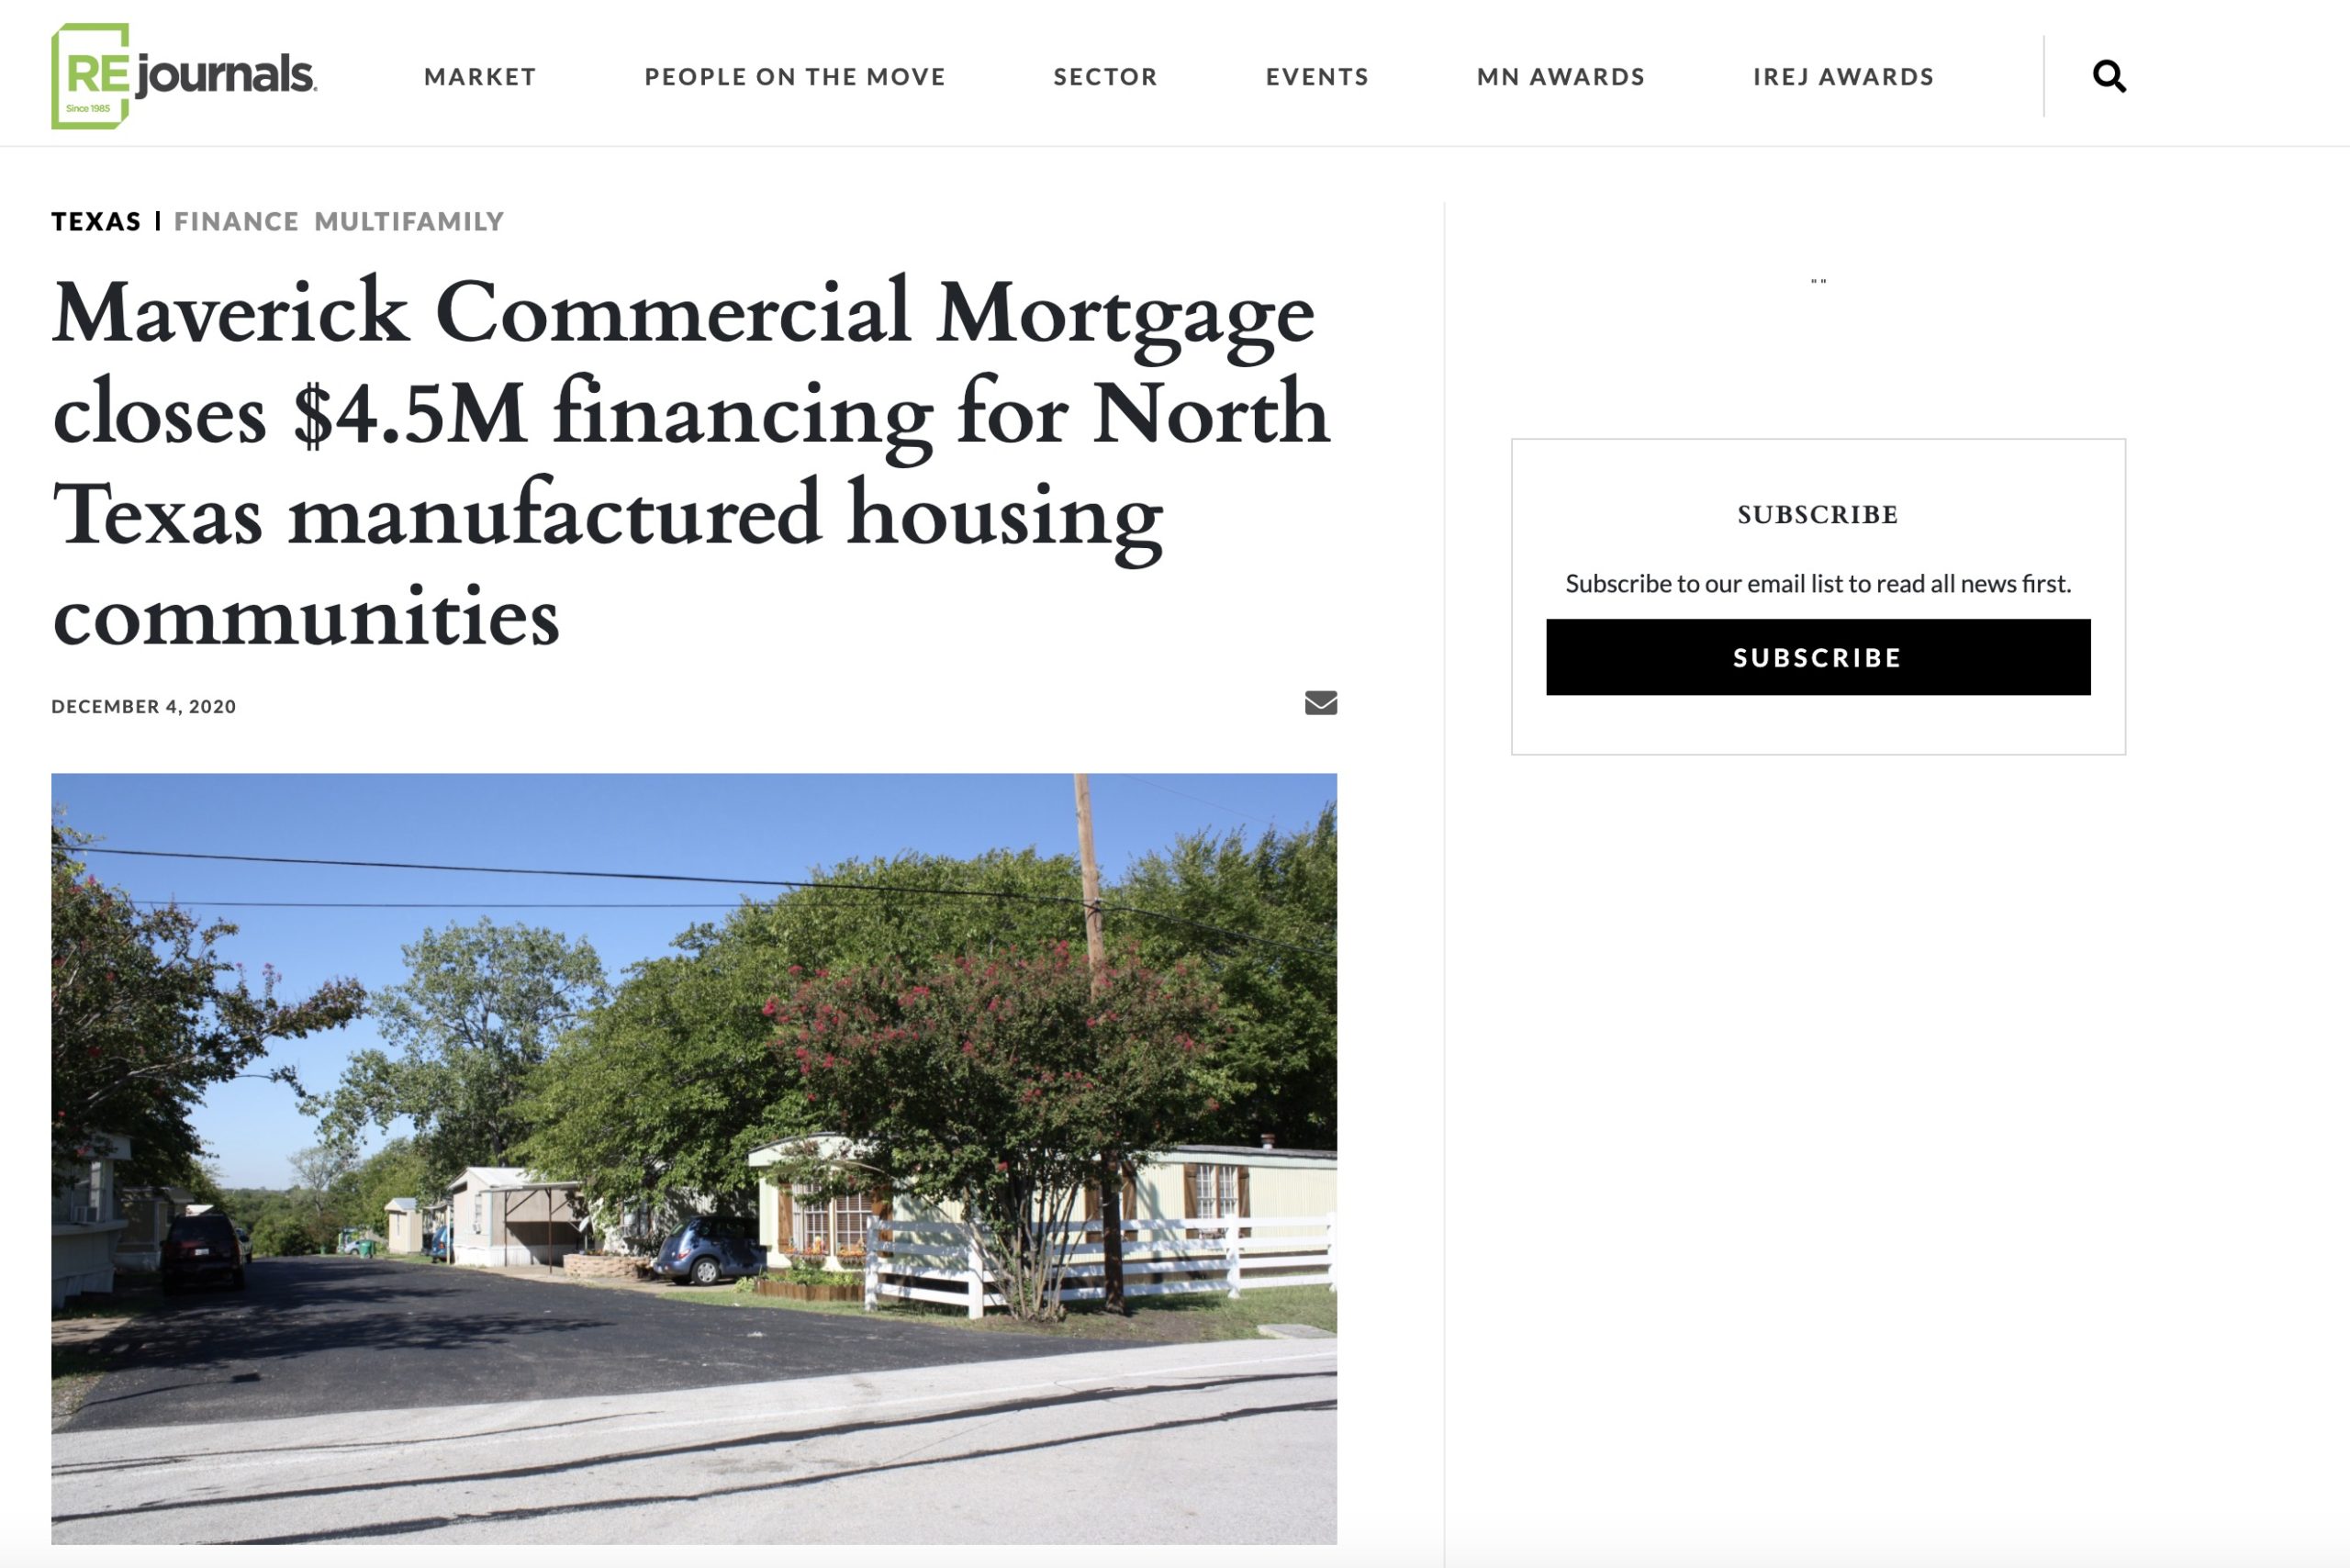 Maverick Commercial Mortgage closes $4.5M financing for North Texas manufactured housing communities